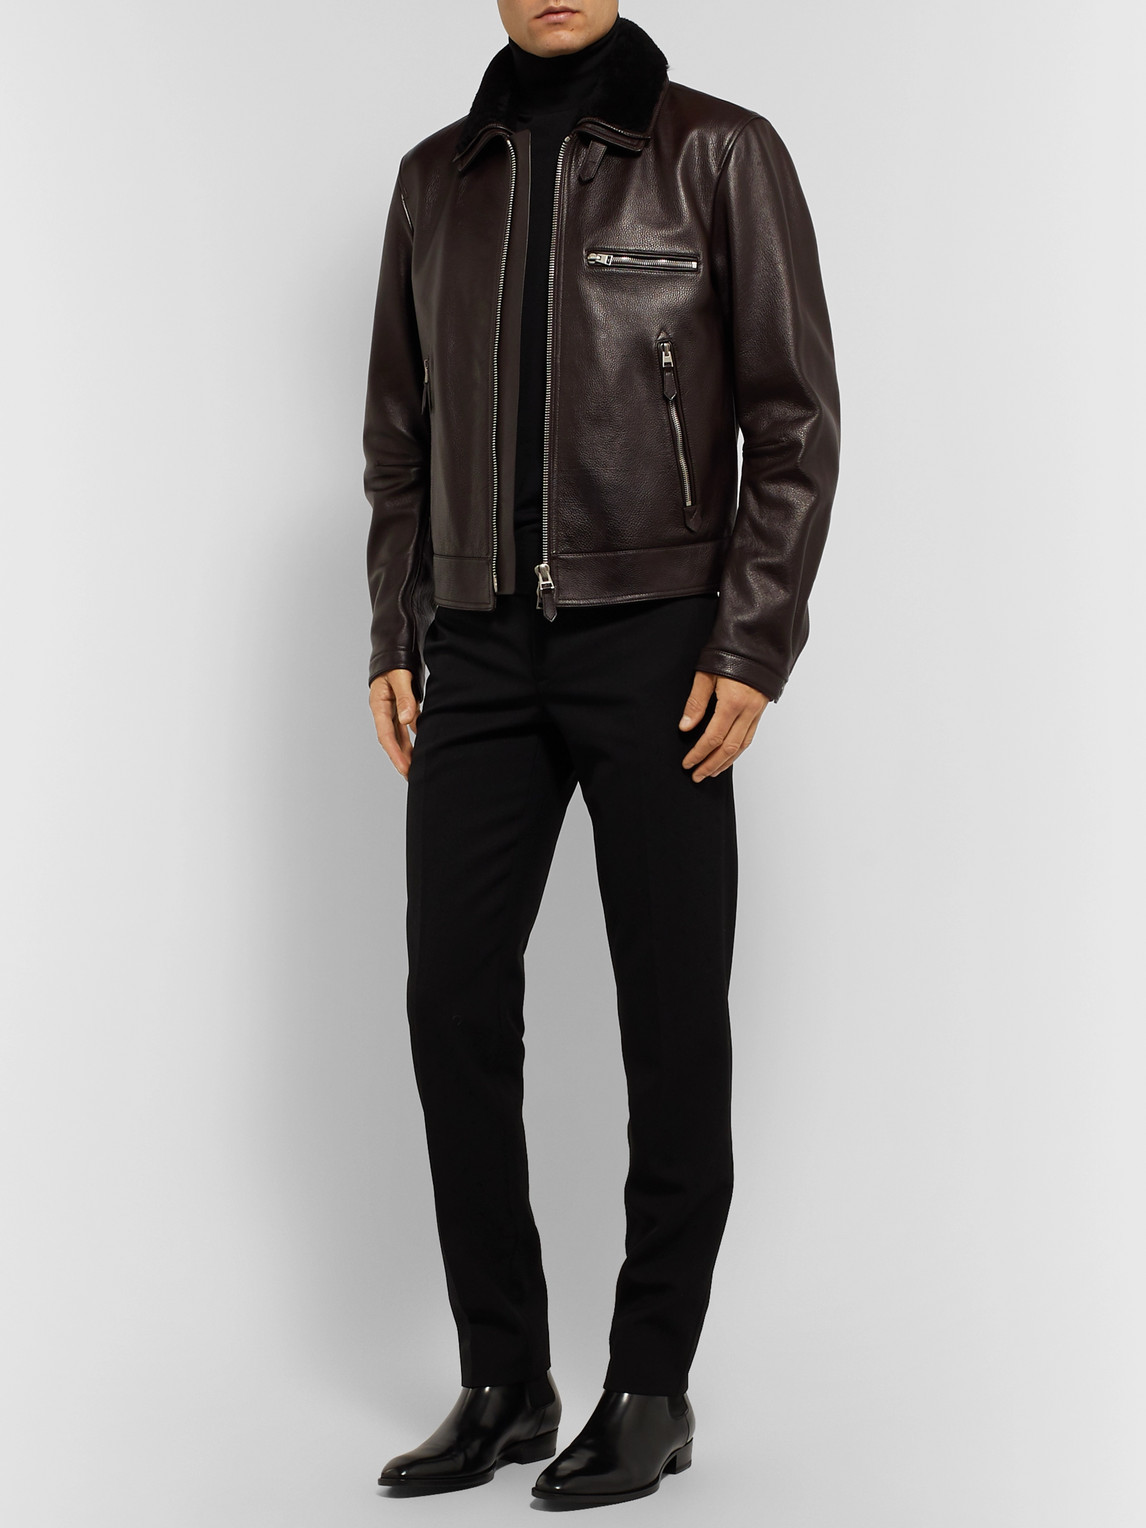 TOM FORD SLIM-FIT SHEARLING-TRIMMED FULL-GRAIN LEATHER JACKET